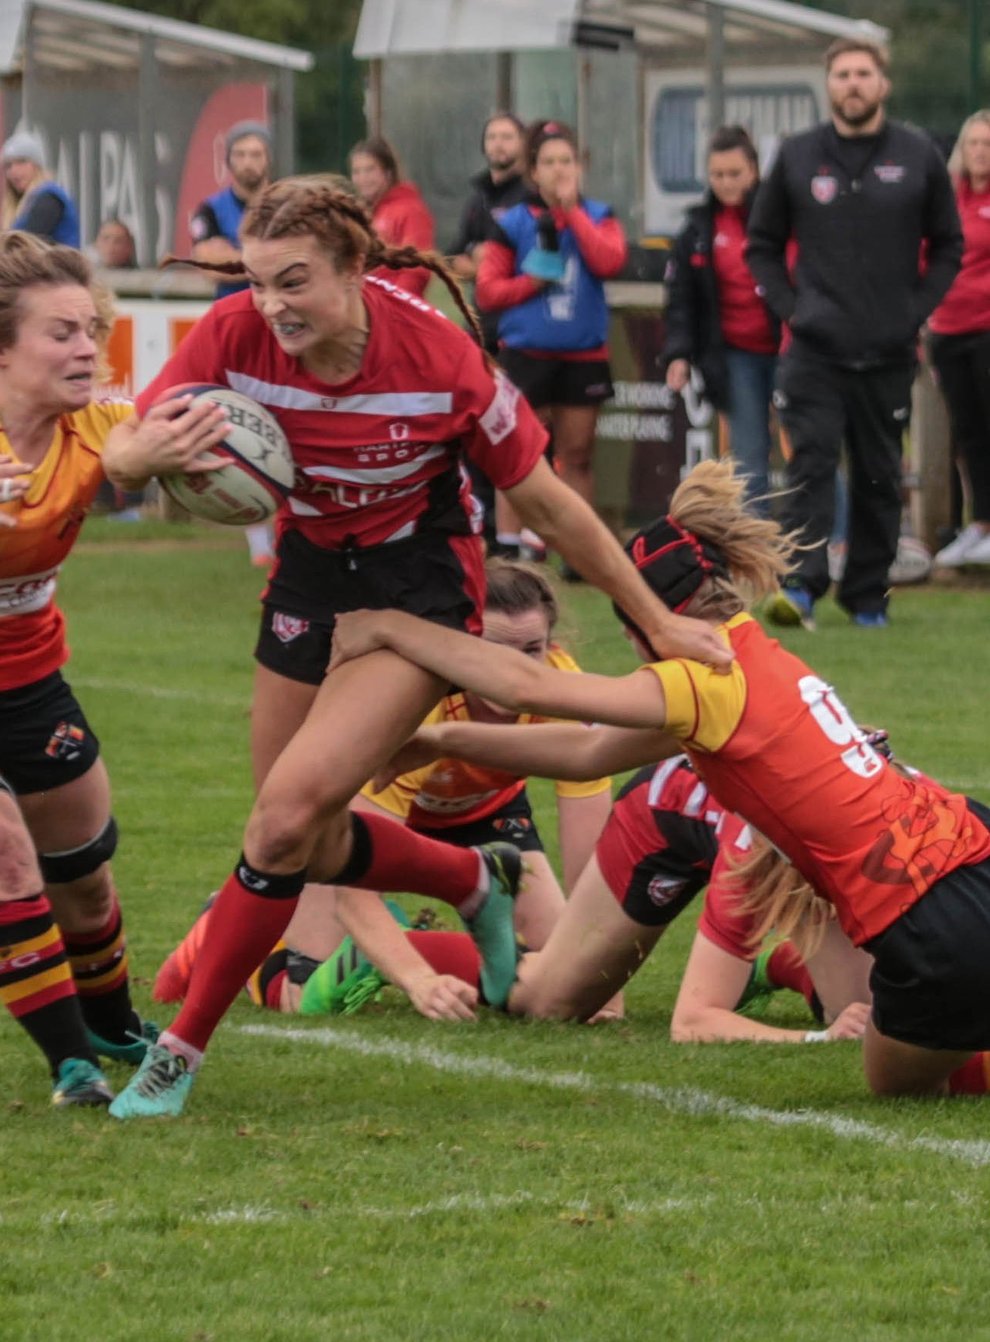 Gloucester-Hartpury's Kelly Smith (ball in hand) scored two tries for her side (Gloucester-Hartpury Twitter)